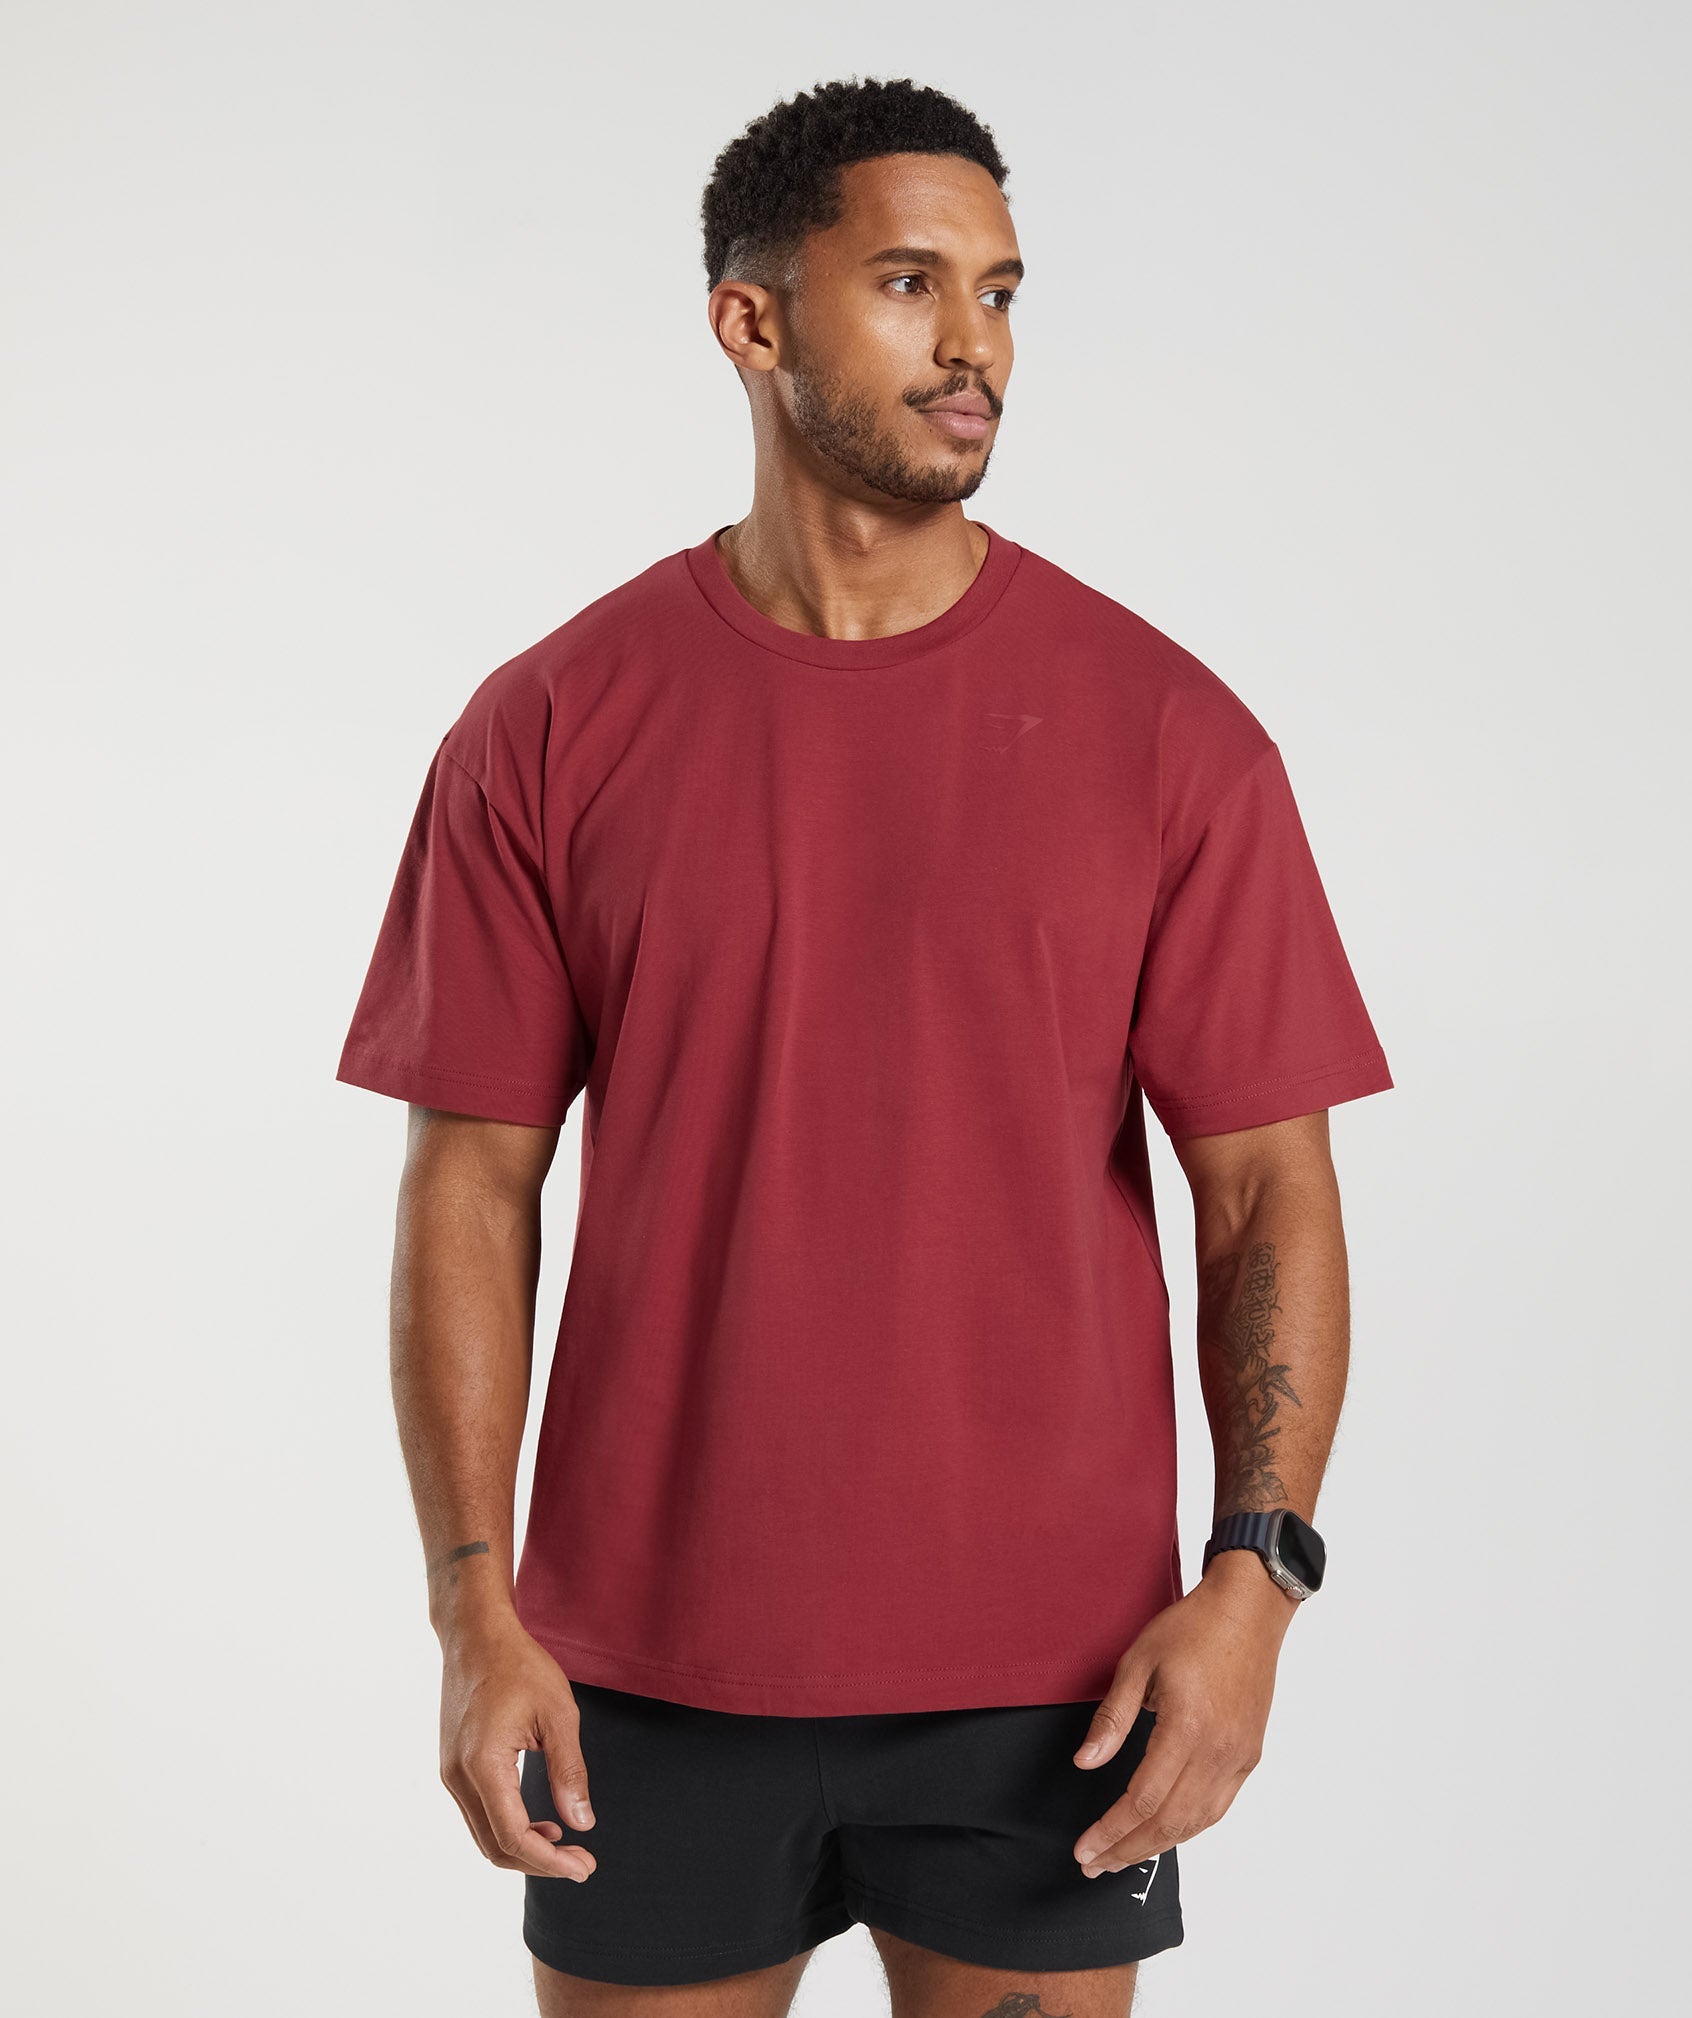 Oversized Sharkhead T-Shirt in Pomegranate Red - view 2